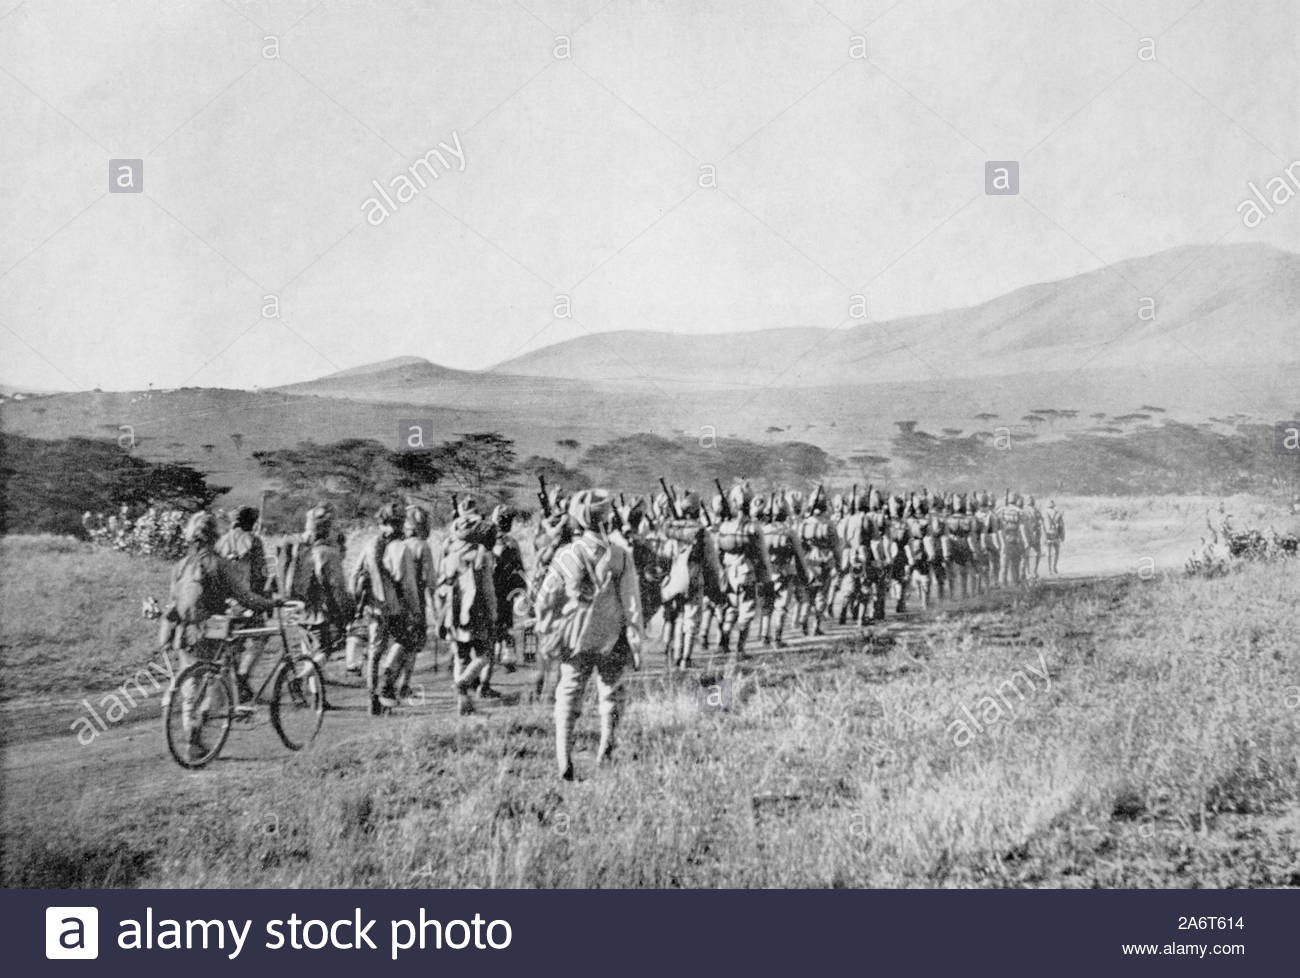 WW1 Indian Troops on the march in British East Africa, vintage photograph from 1914 Stock Photo